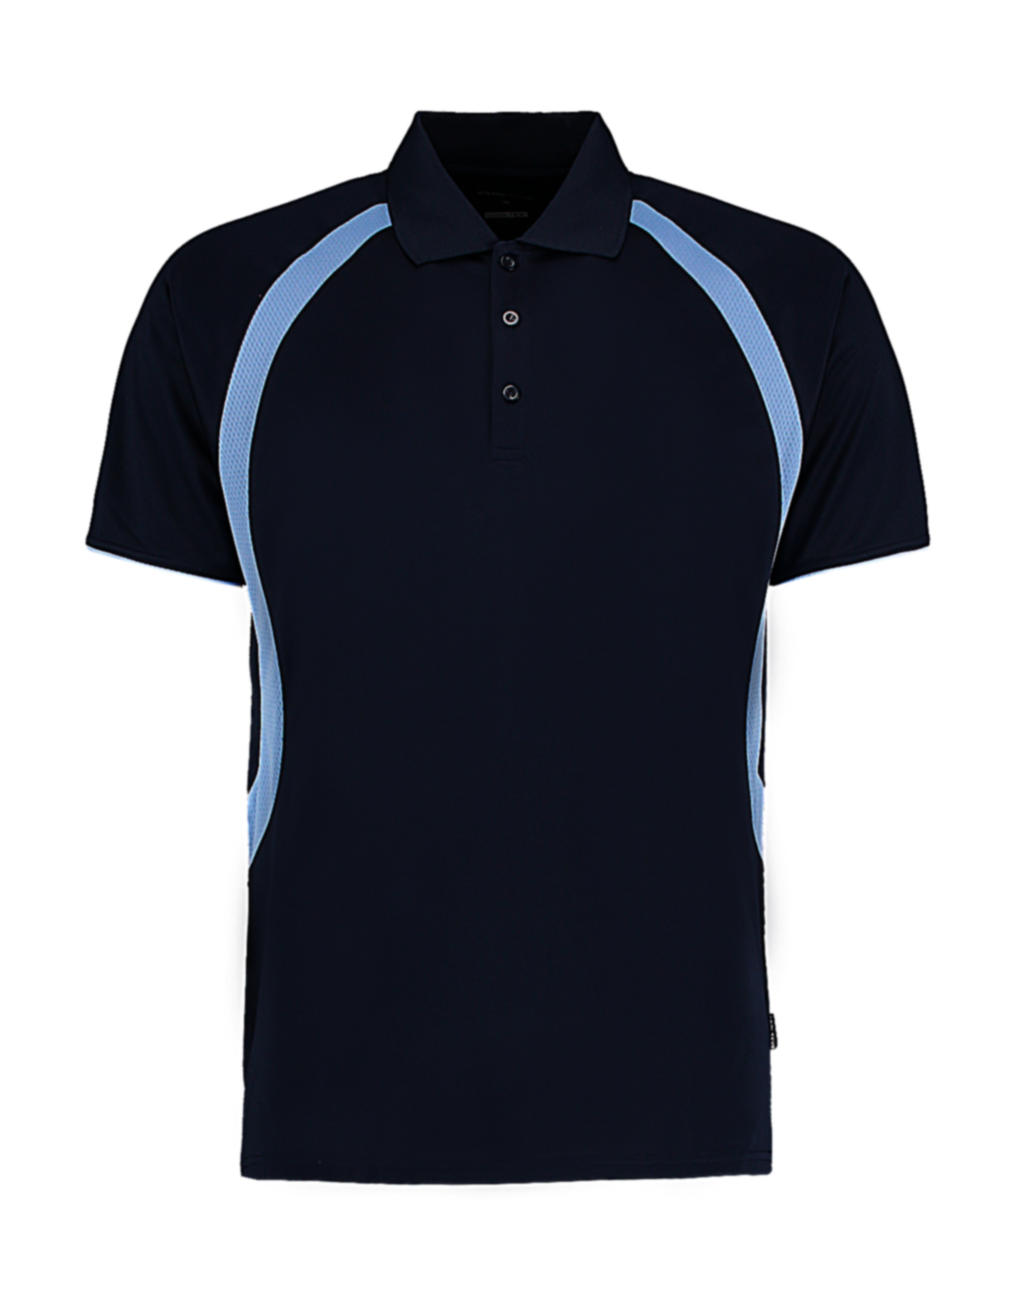 550.11 / Classic Fit Cooltex® Riviera Polo Shirt / Navy/Light Blue